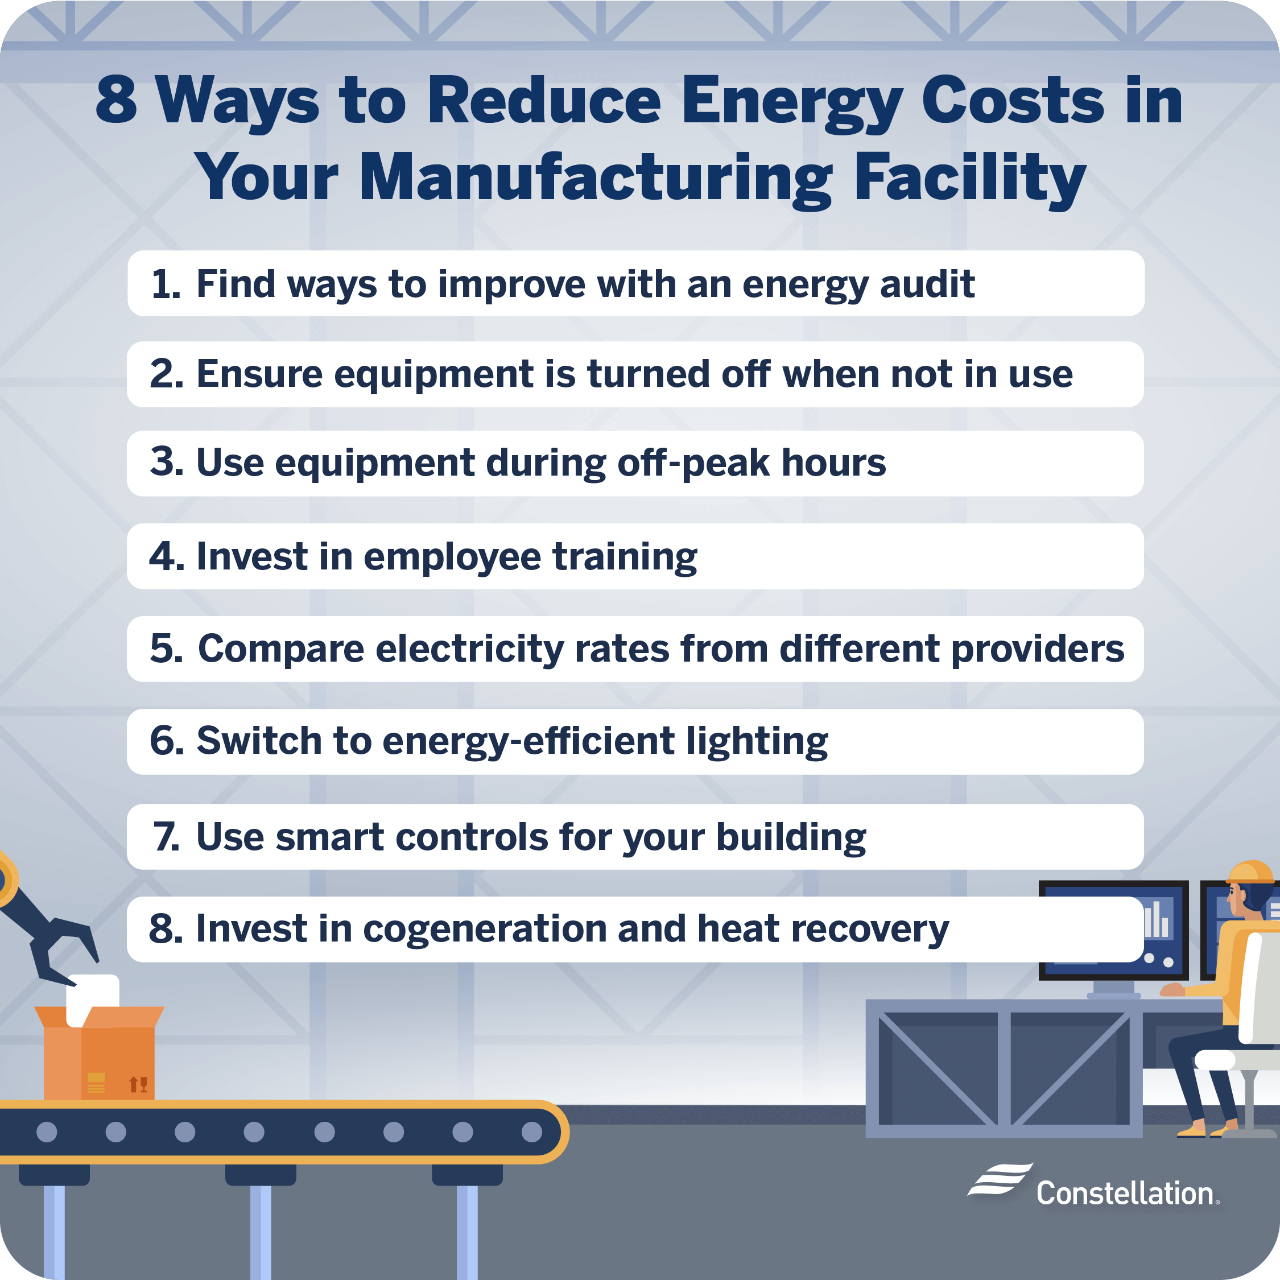 Ways to reduce energy costs in your manufacturing facility.